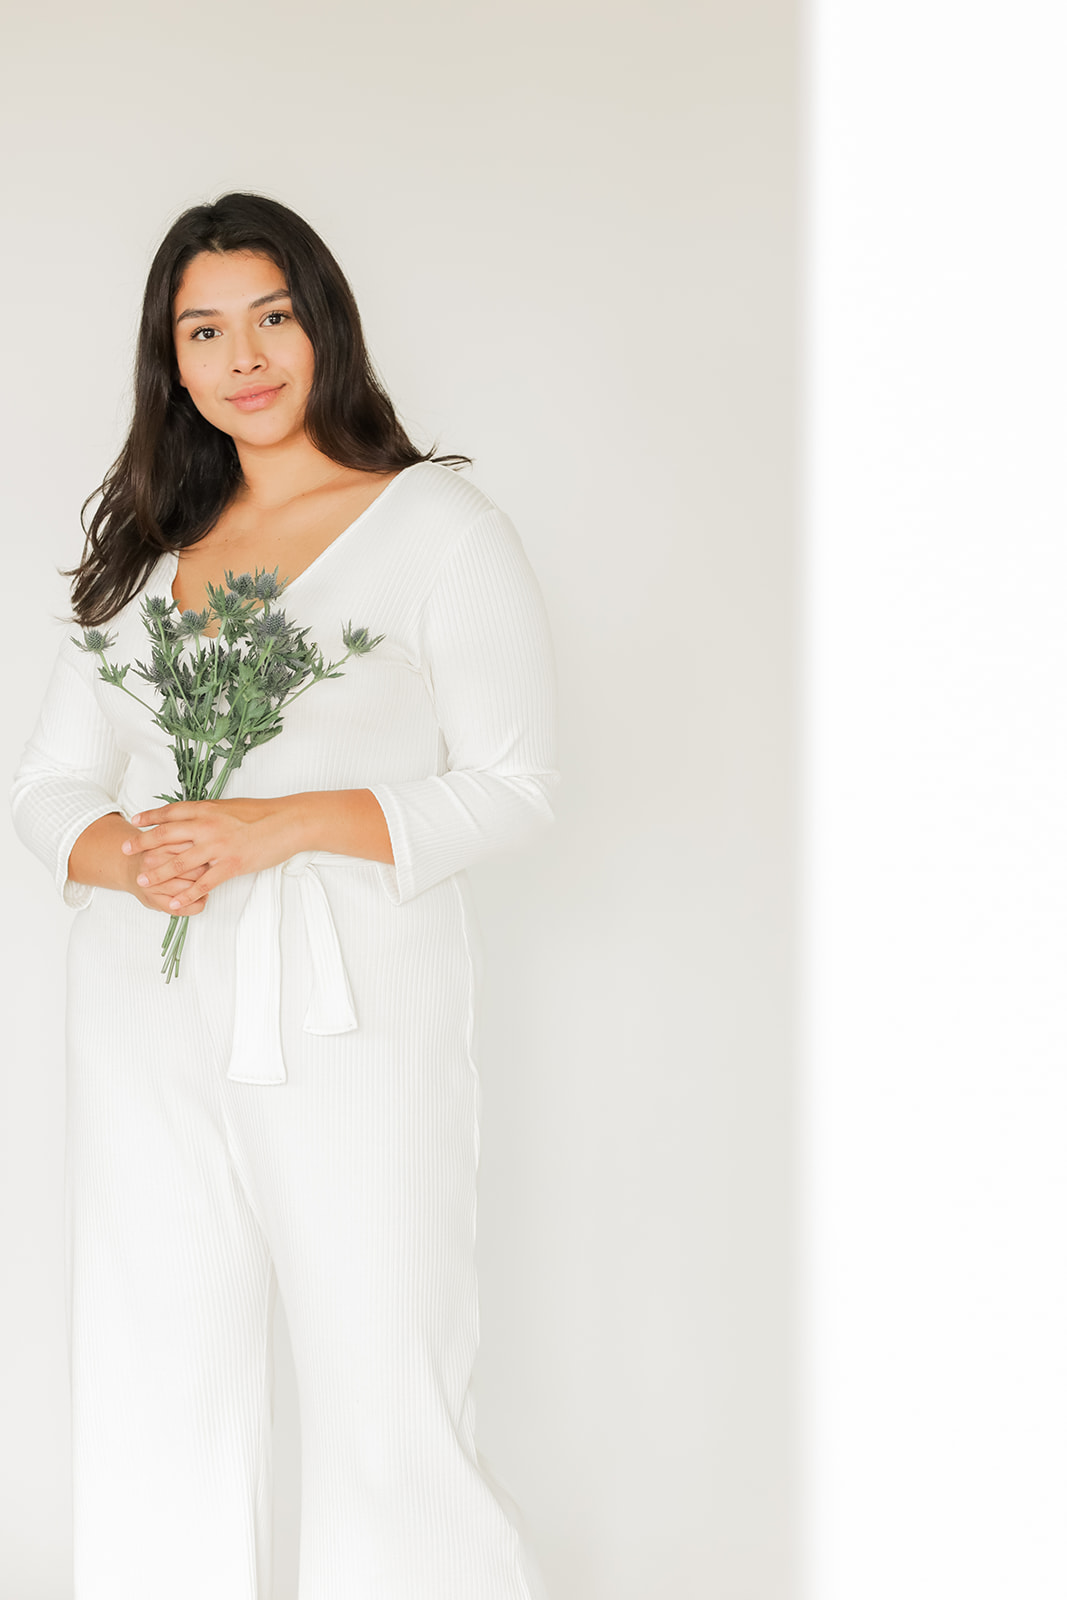 A woman in a white jumpsuit holds a bouquet of greenery, standing beside a white wall.